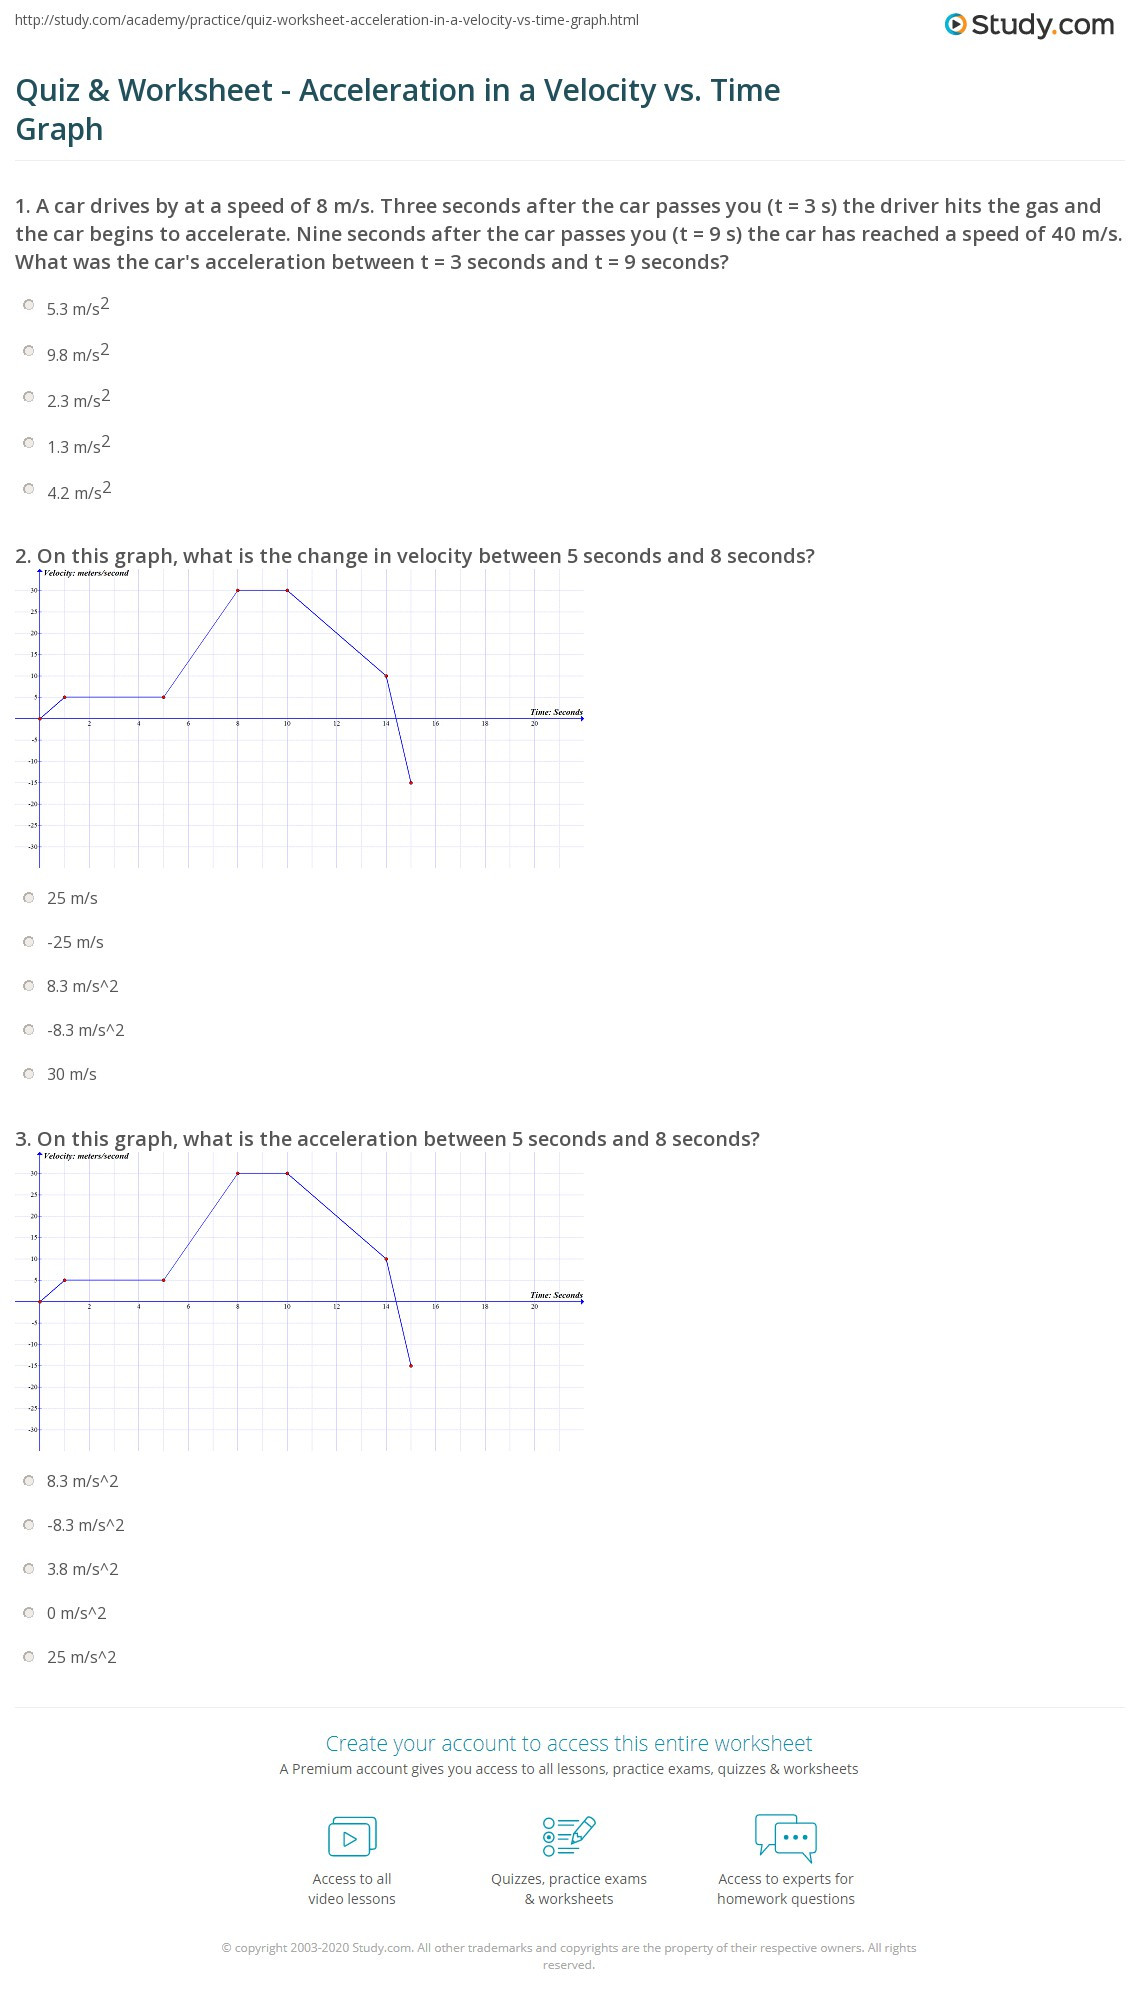 Speed Vs Time Graph Worksheet Quiz &amp; Worksheet Acceleration In A Velocity Vs Time Graph